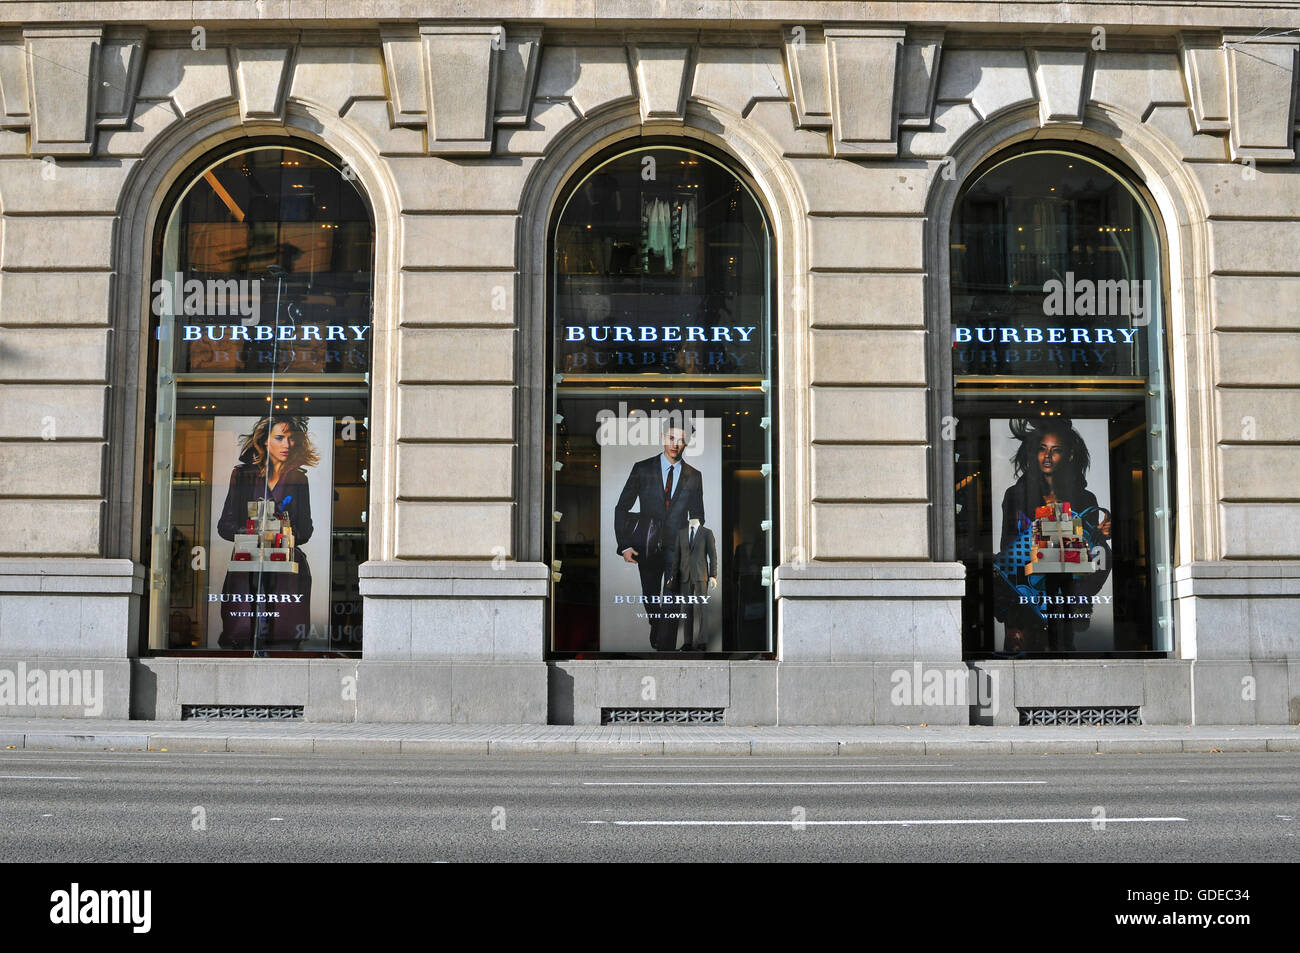 BARCELONA, SPAIN - DECEMBER 8: Facade of Burberry flagship store in the  street of Barcelona on December 8, 2014 Stock Photo - Alamy